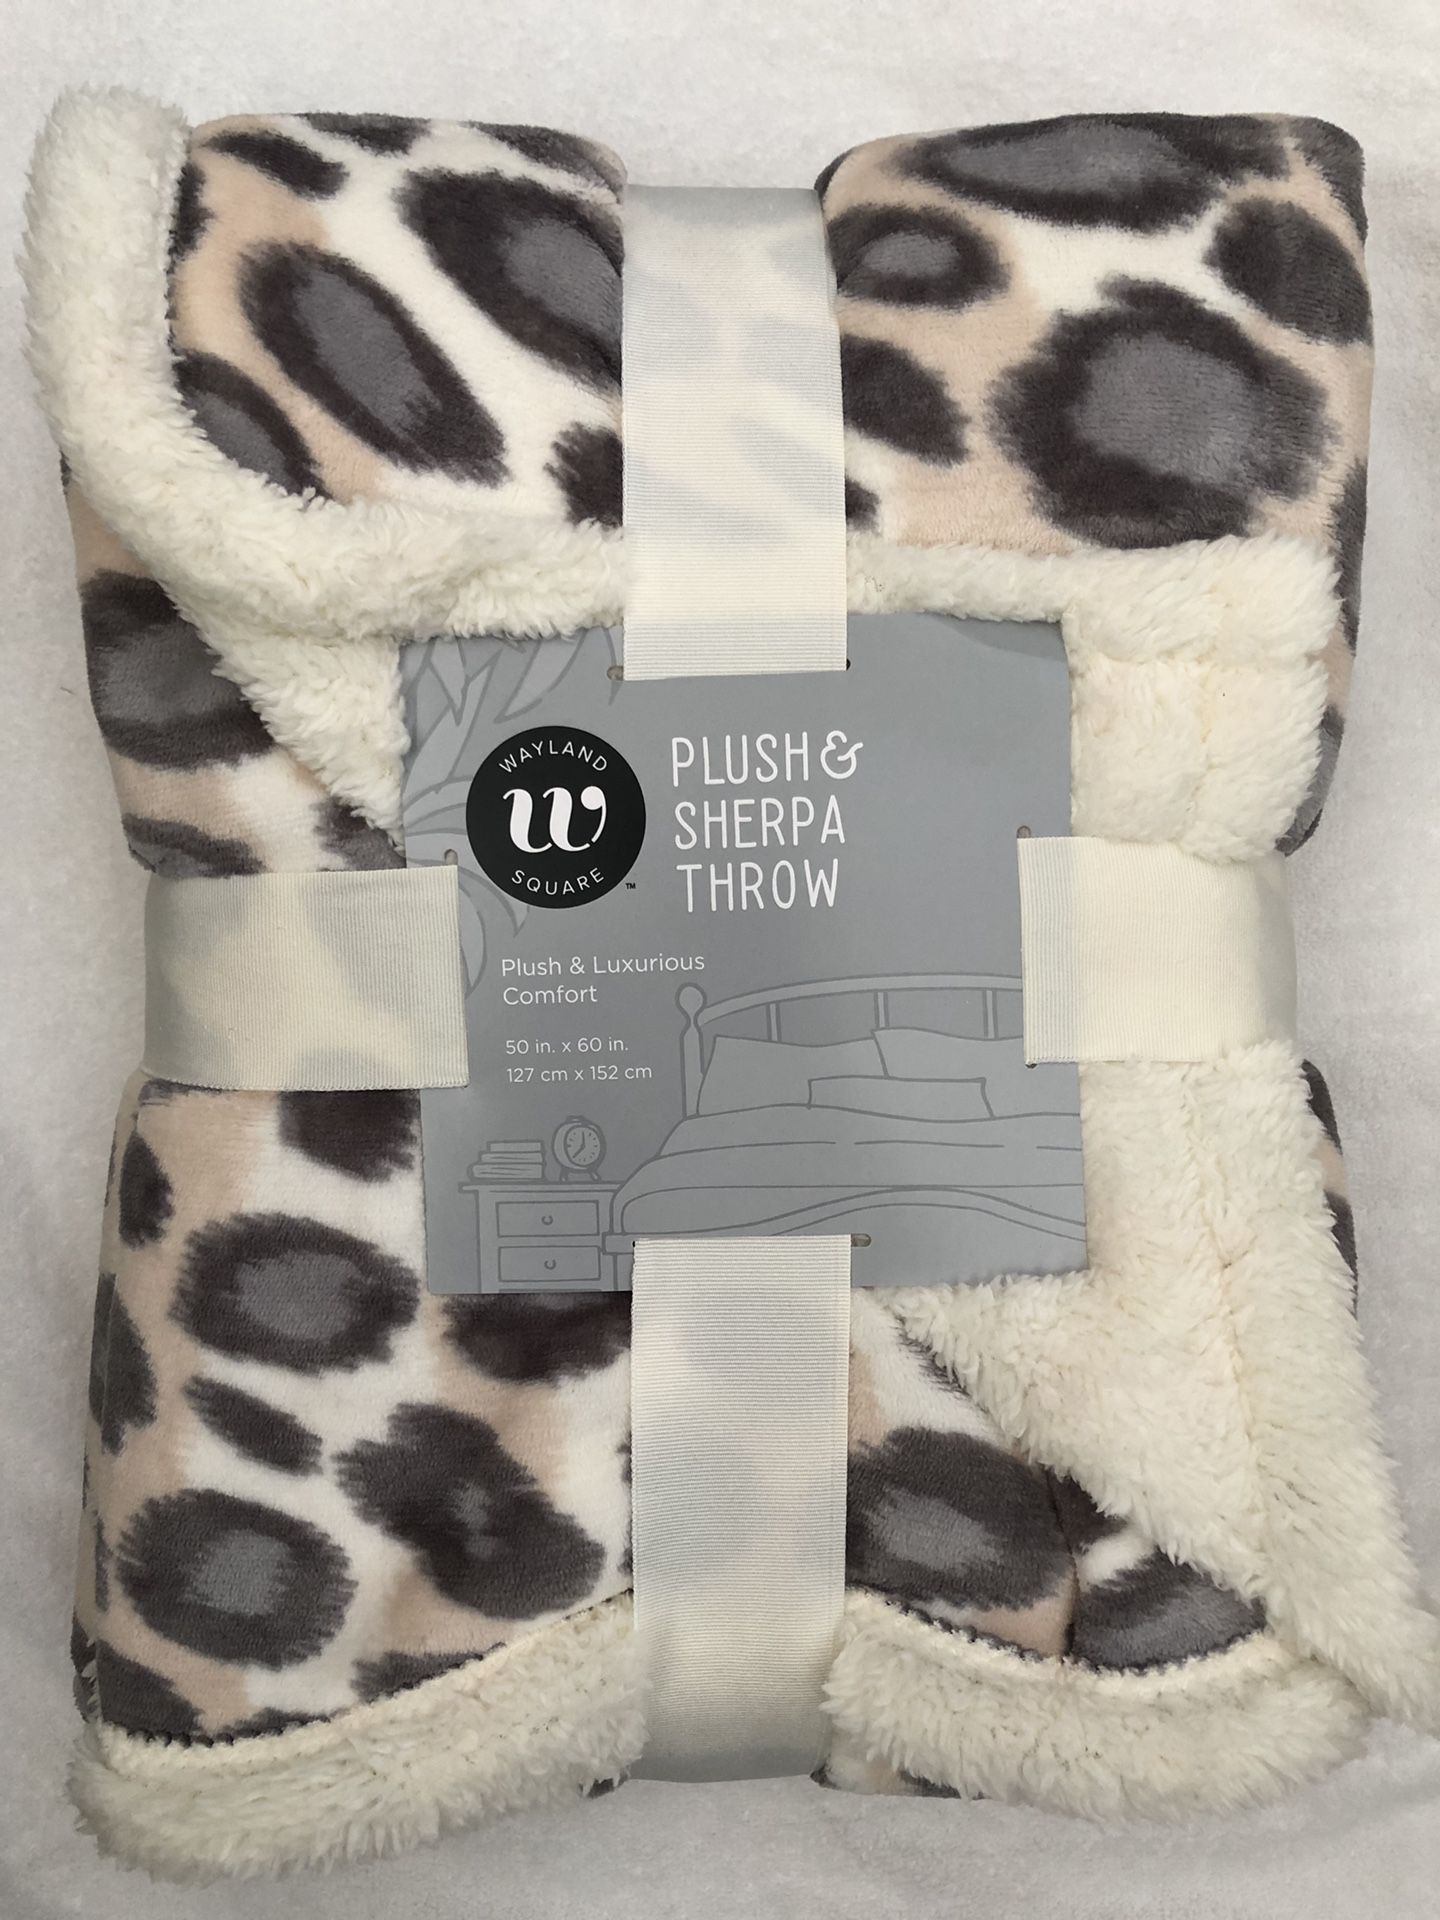 New Wayland Square Plush & Sherpa Throw Blanket 50"X60" (pick up only)